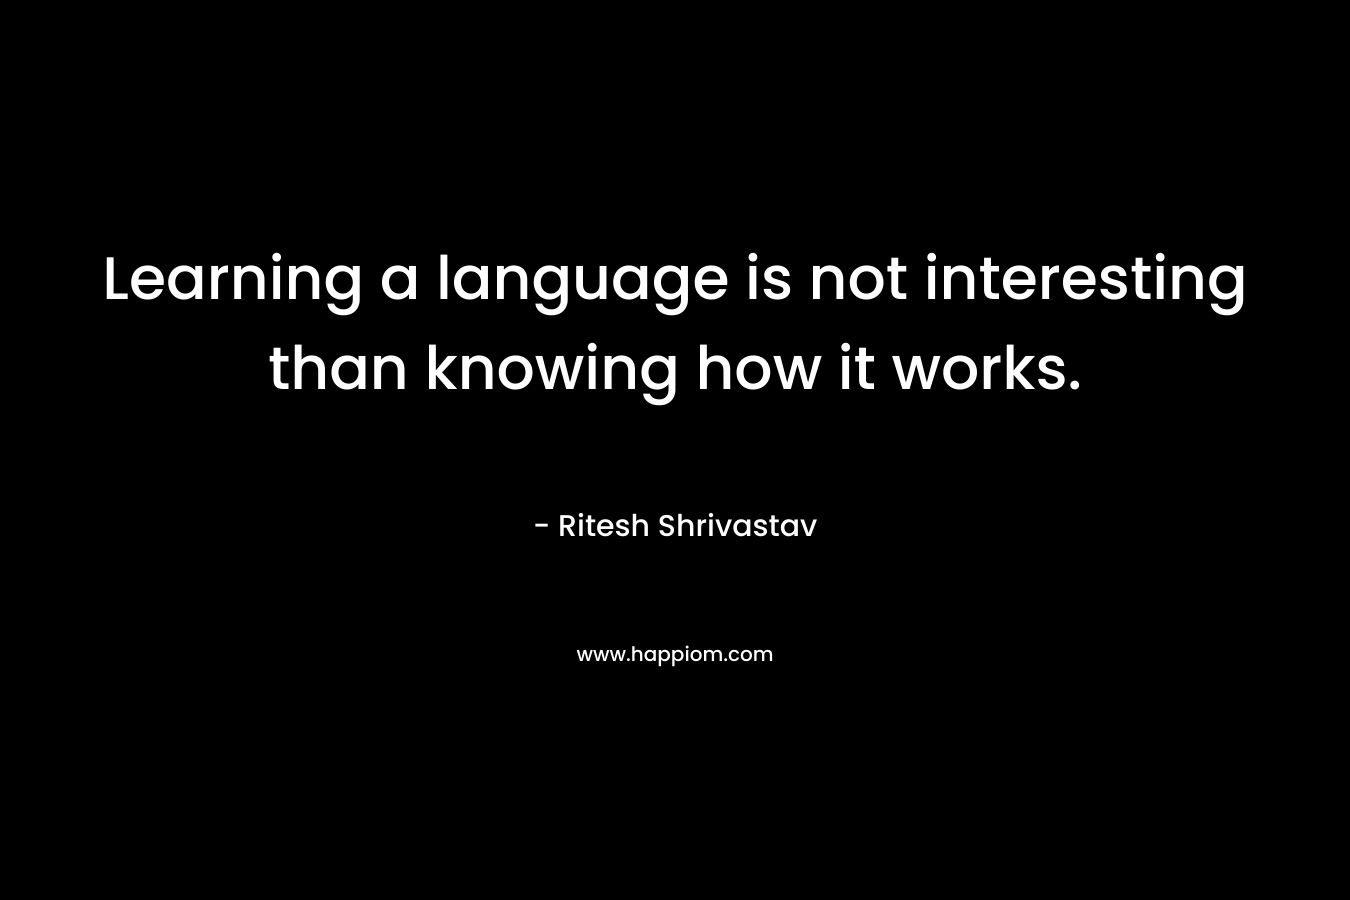 Learning a language is not interesting than knowing how it works.